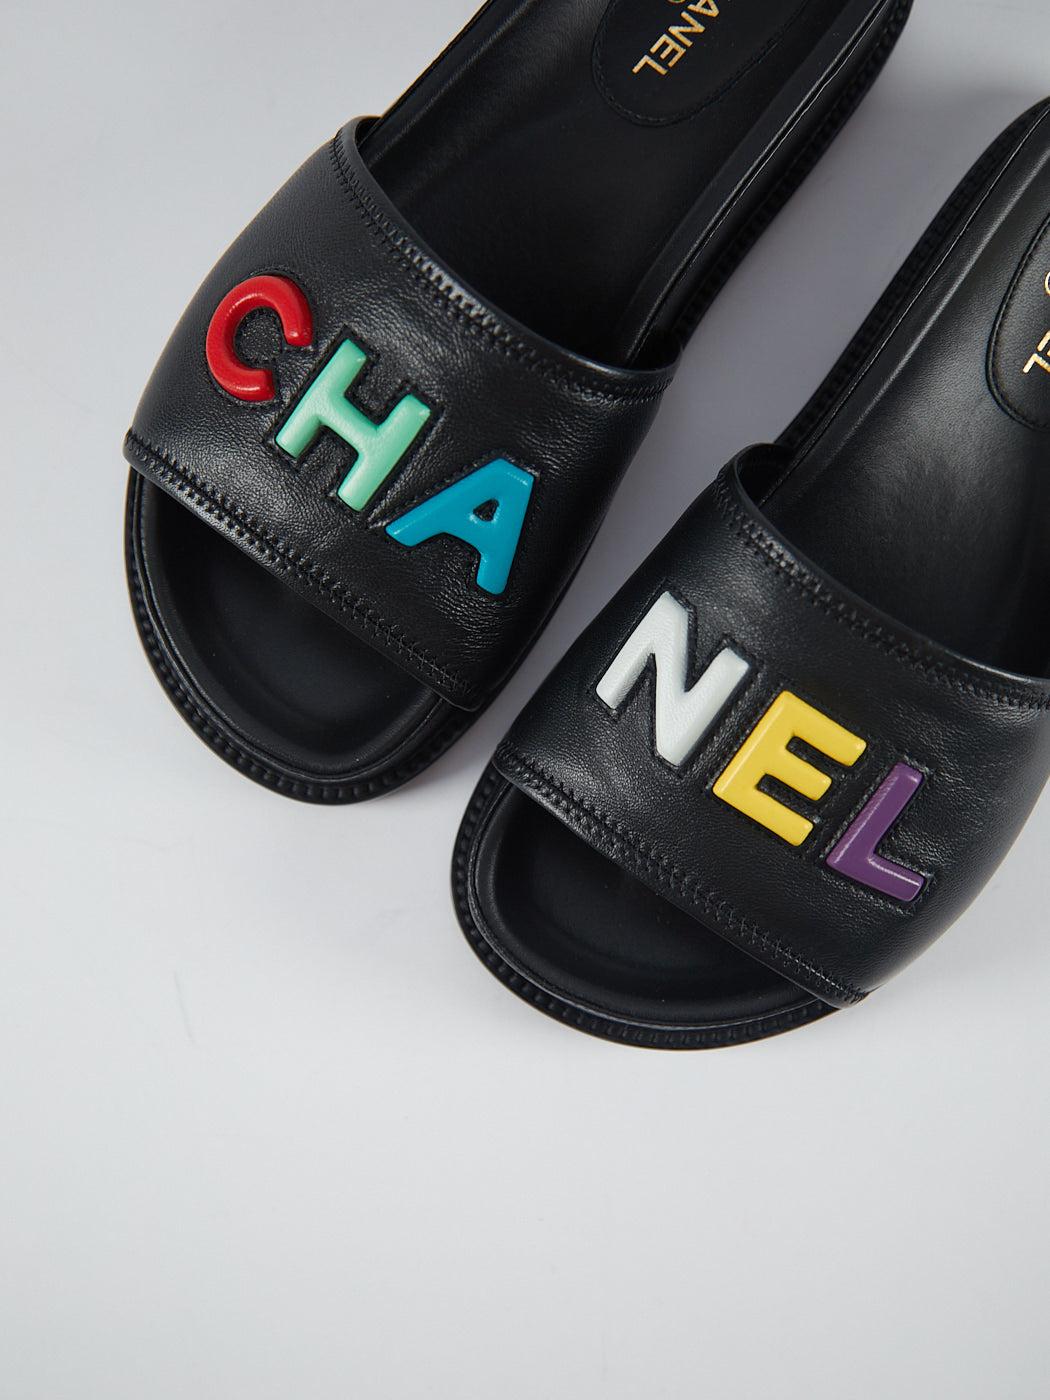 CHANEL SLIDE SANDALS Black with Multicolour Logo - Size 37 In Excellent Condition For Sale In London, GB